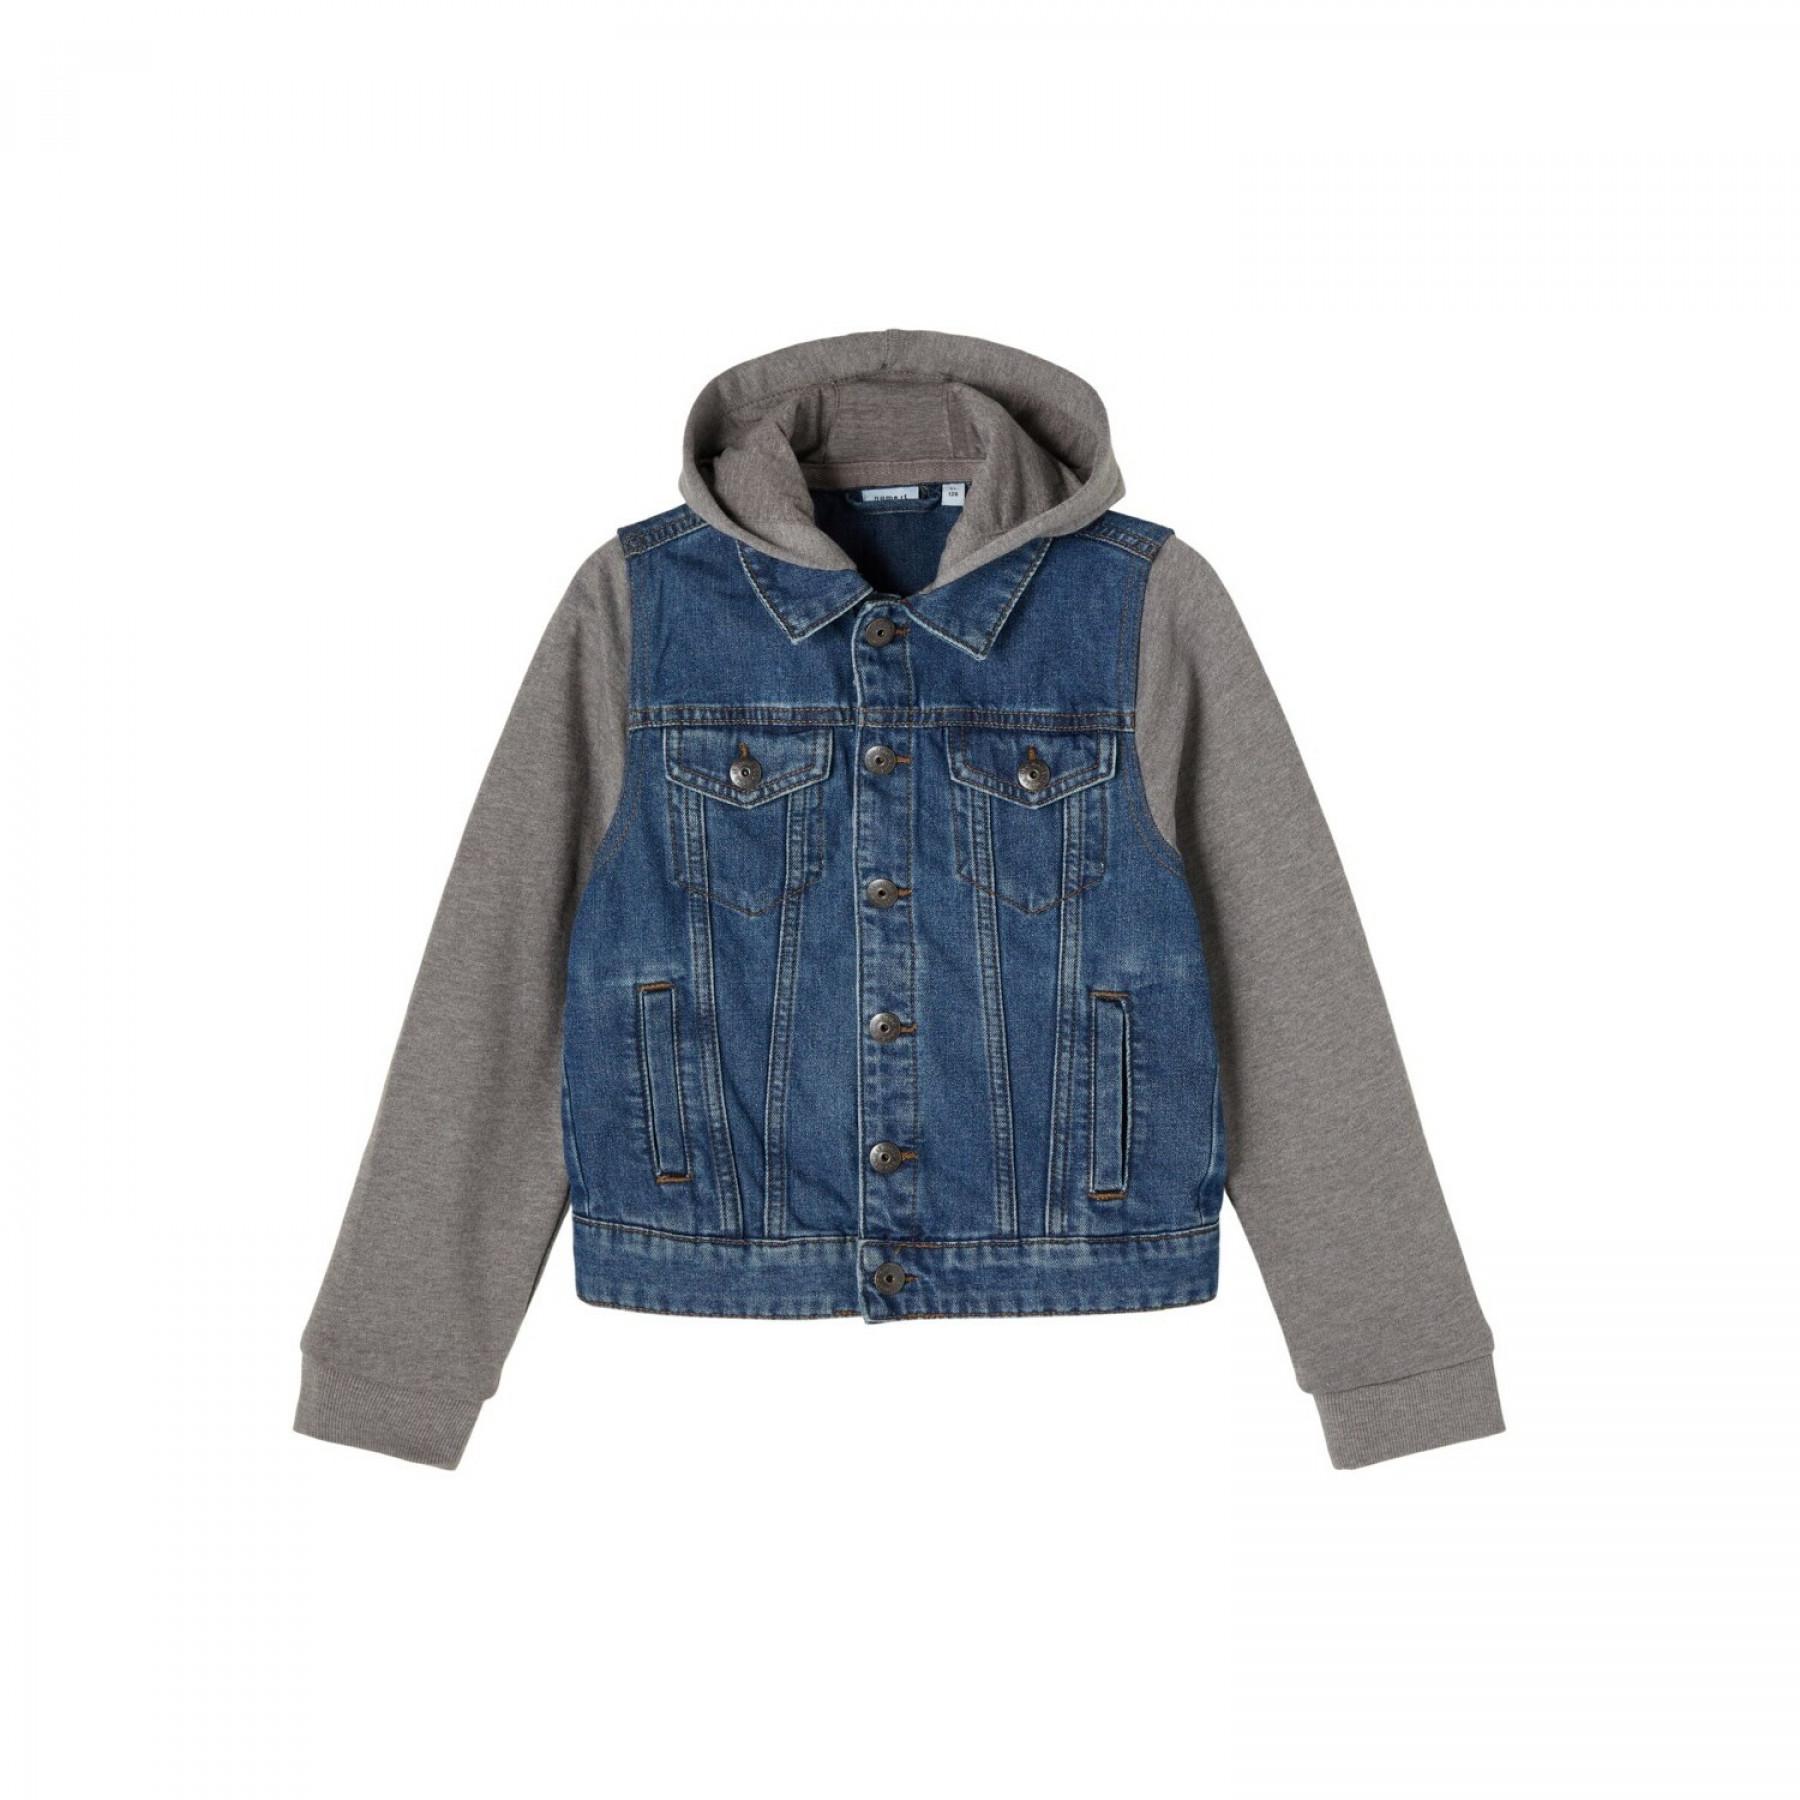 Boy's hooded denim jacket Name it Tpims